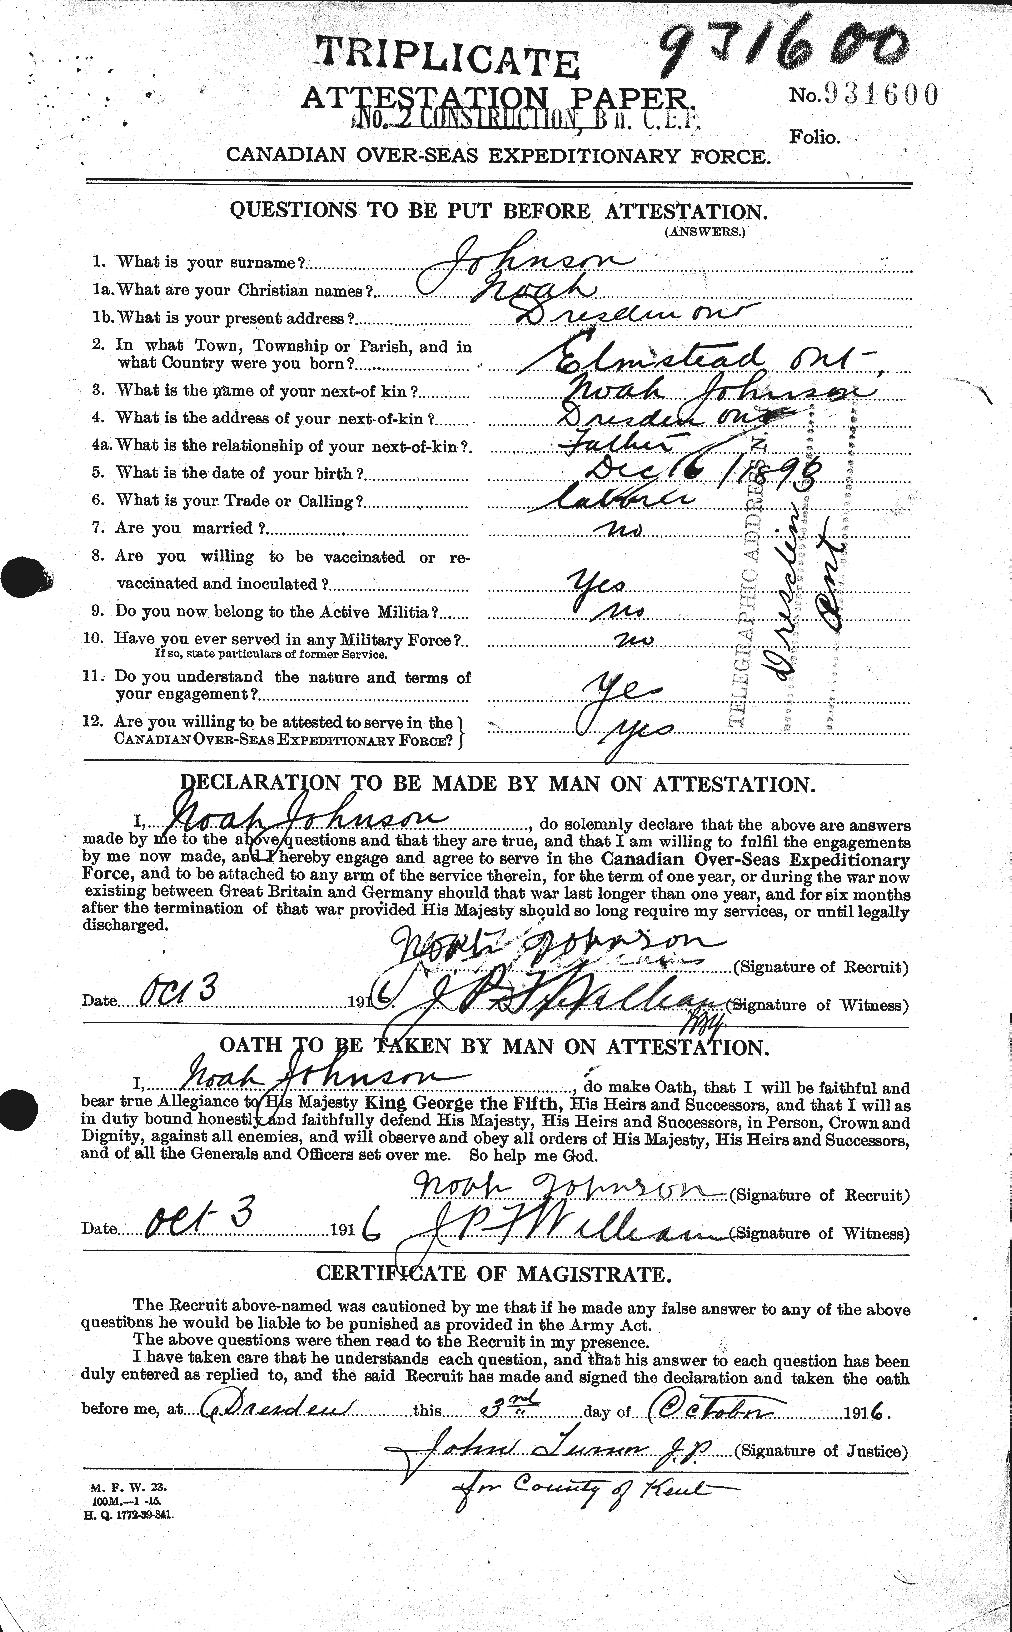 Personnel Records of the First World War - CEF 417183a